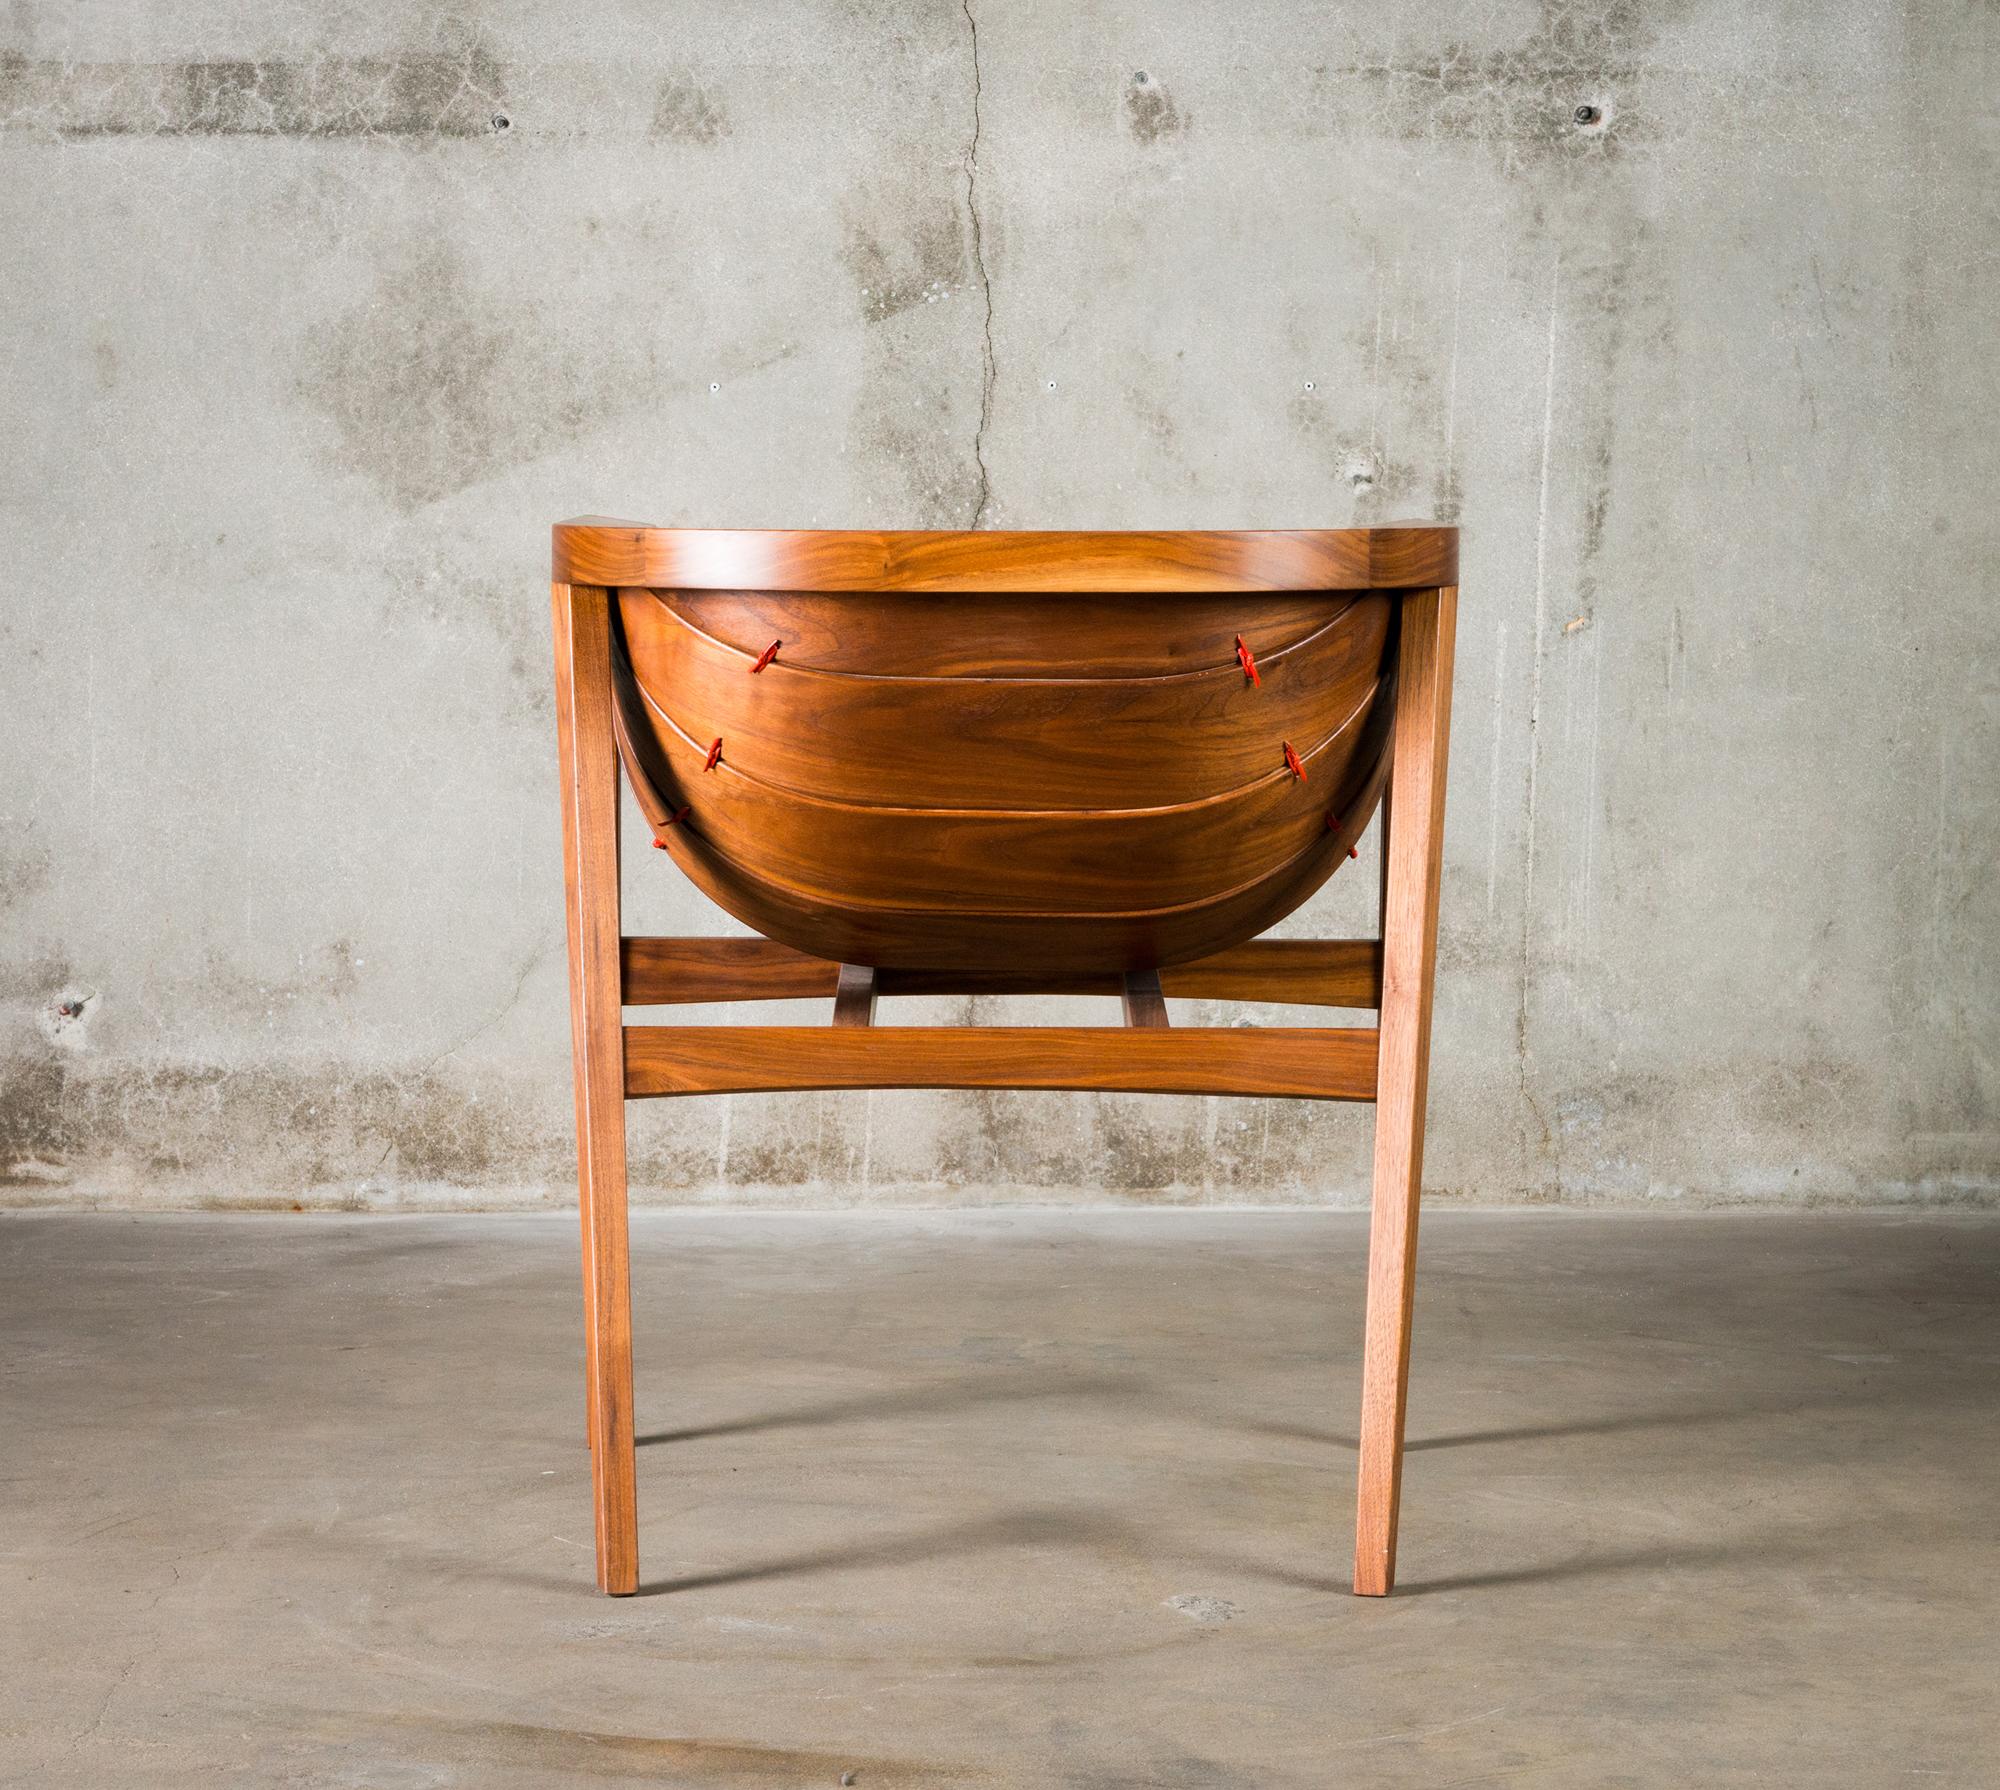 Contemporary Chair by Kyung-Tack Roh In Excellent Condition For Sale In Los Angeles, CA